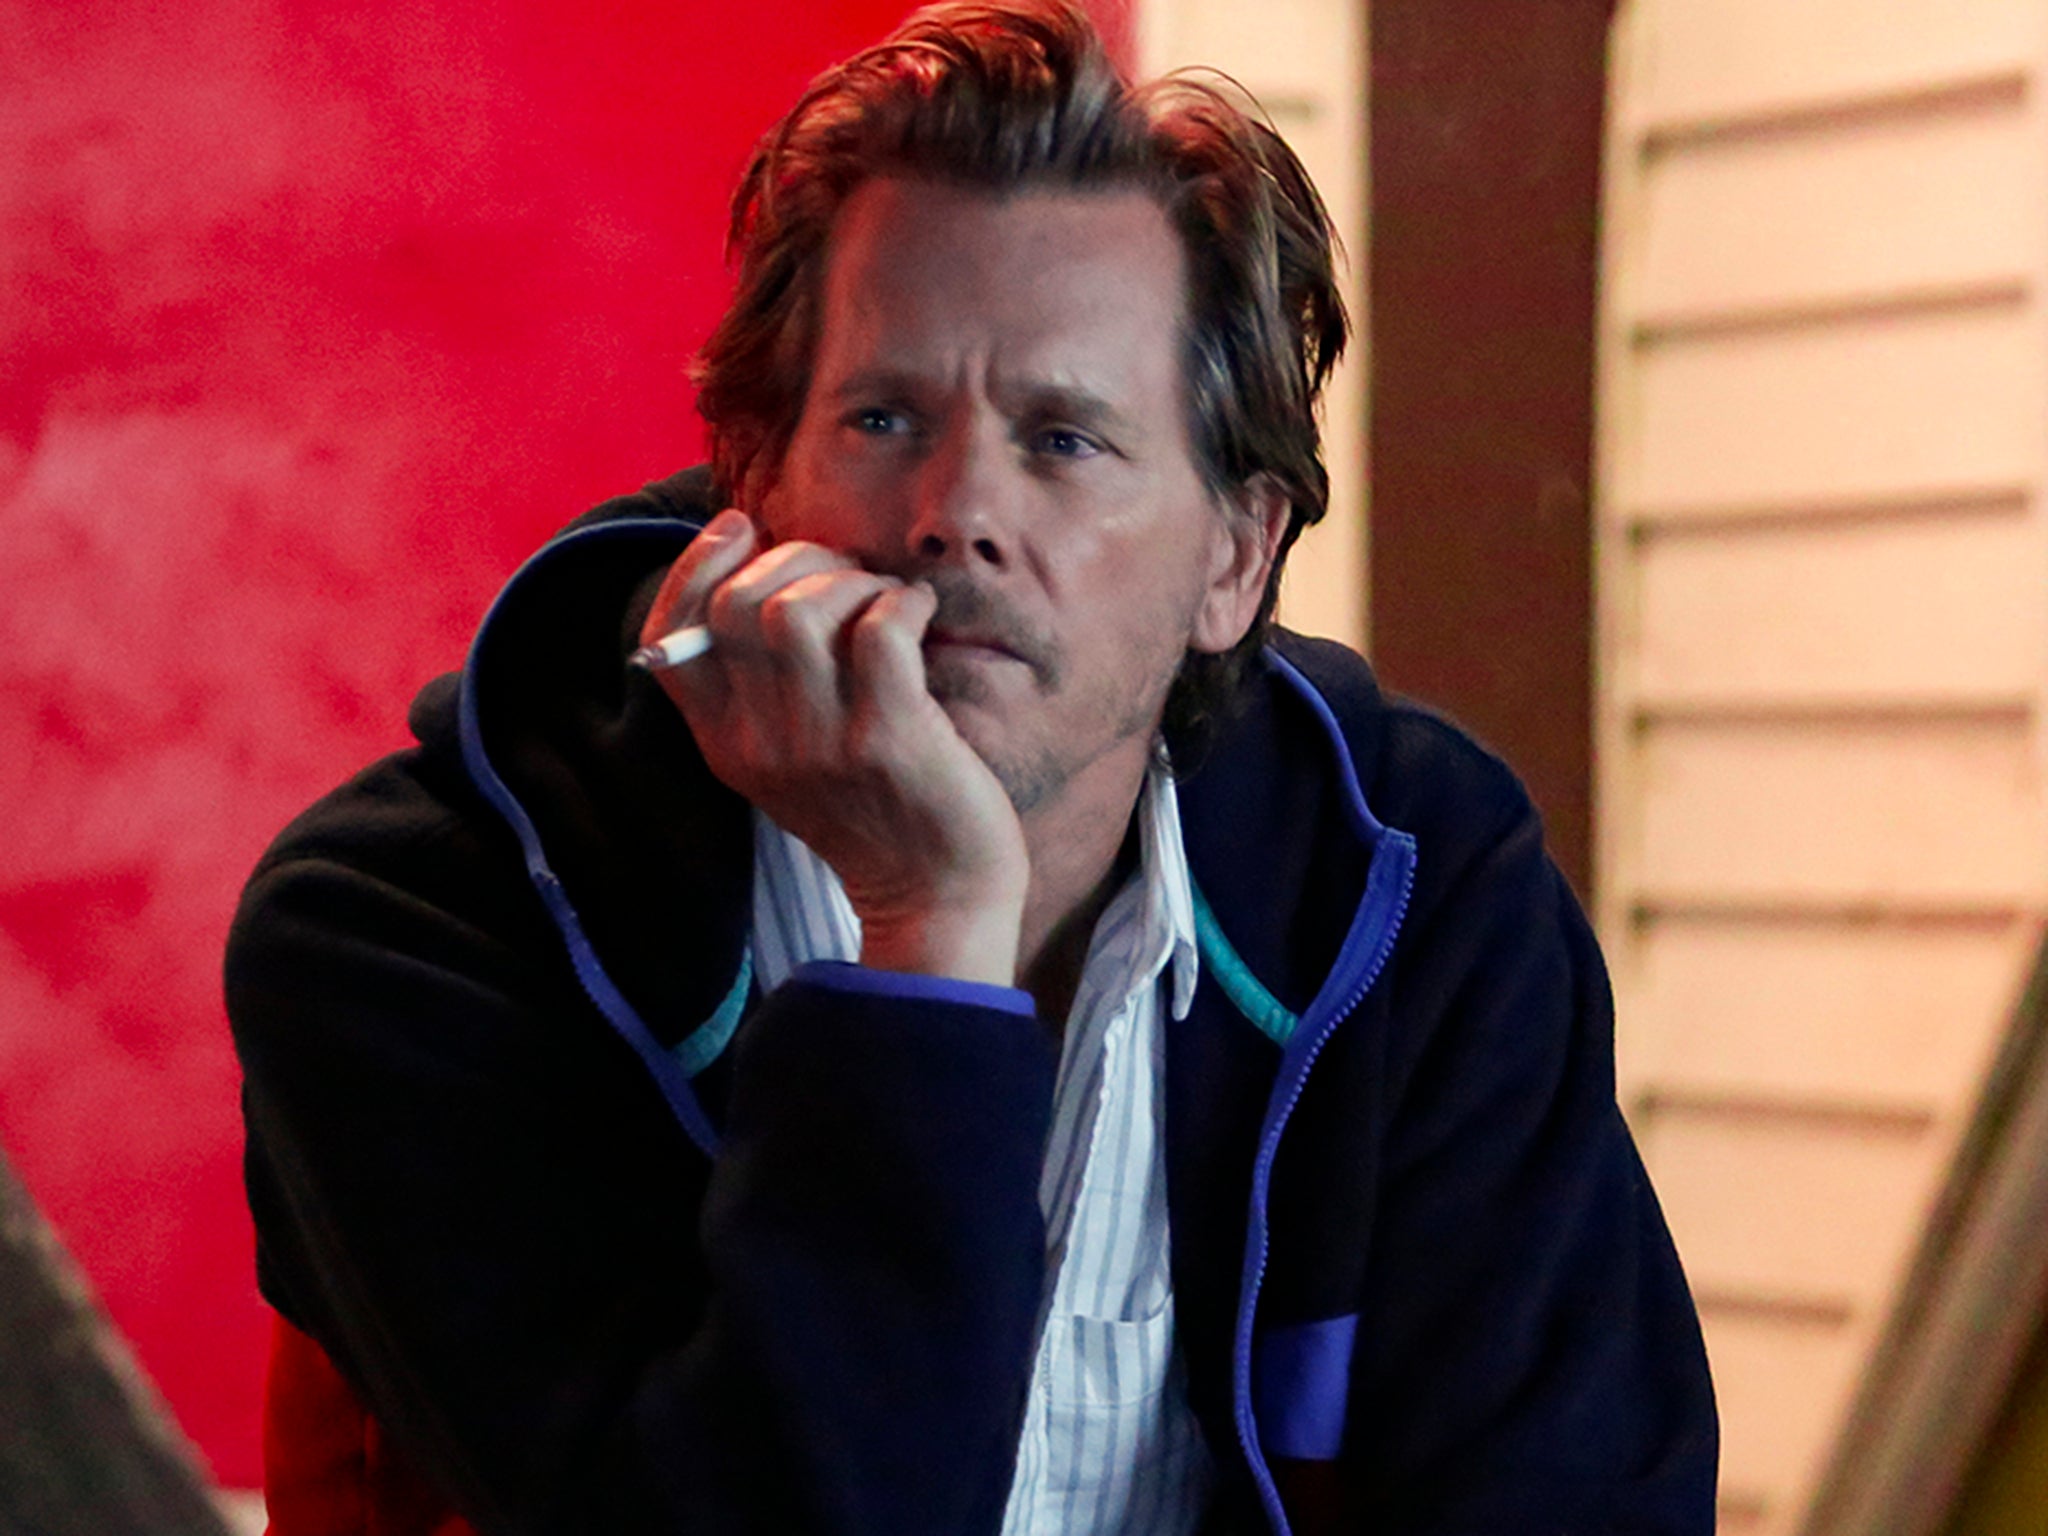 Kevin Bacon in 'Story of a Girl', which is directed by his wife Kyra Sedgwick